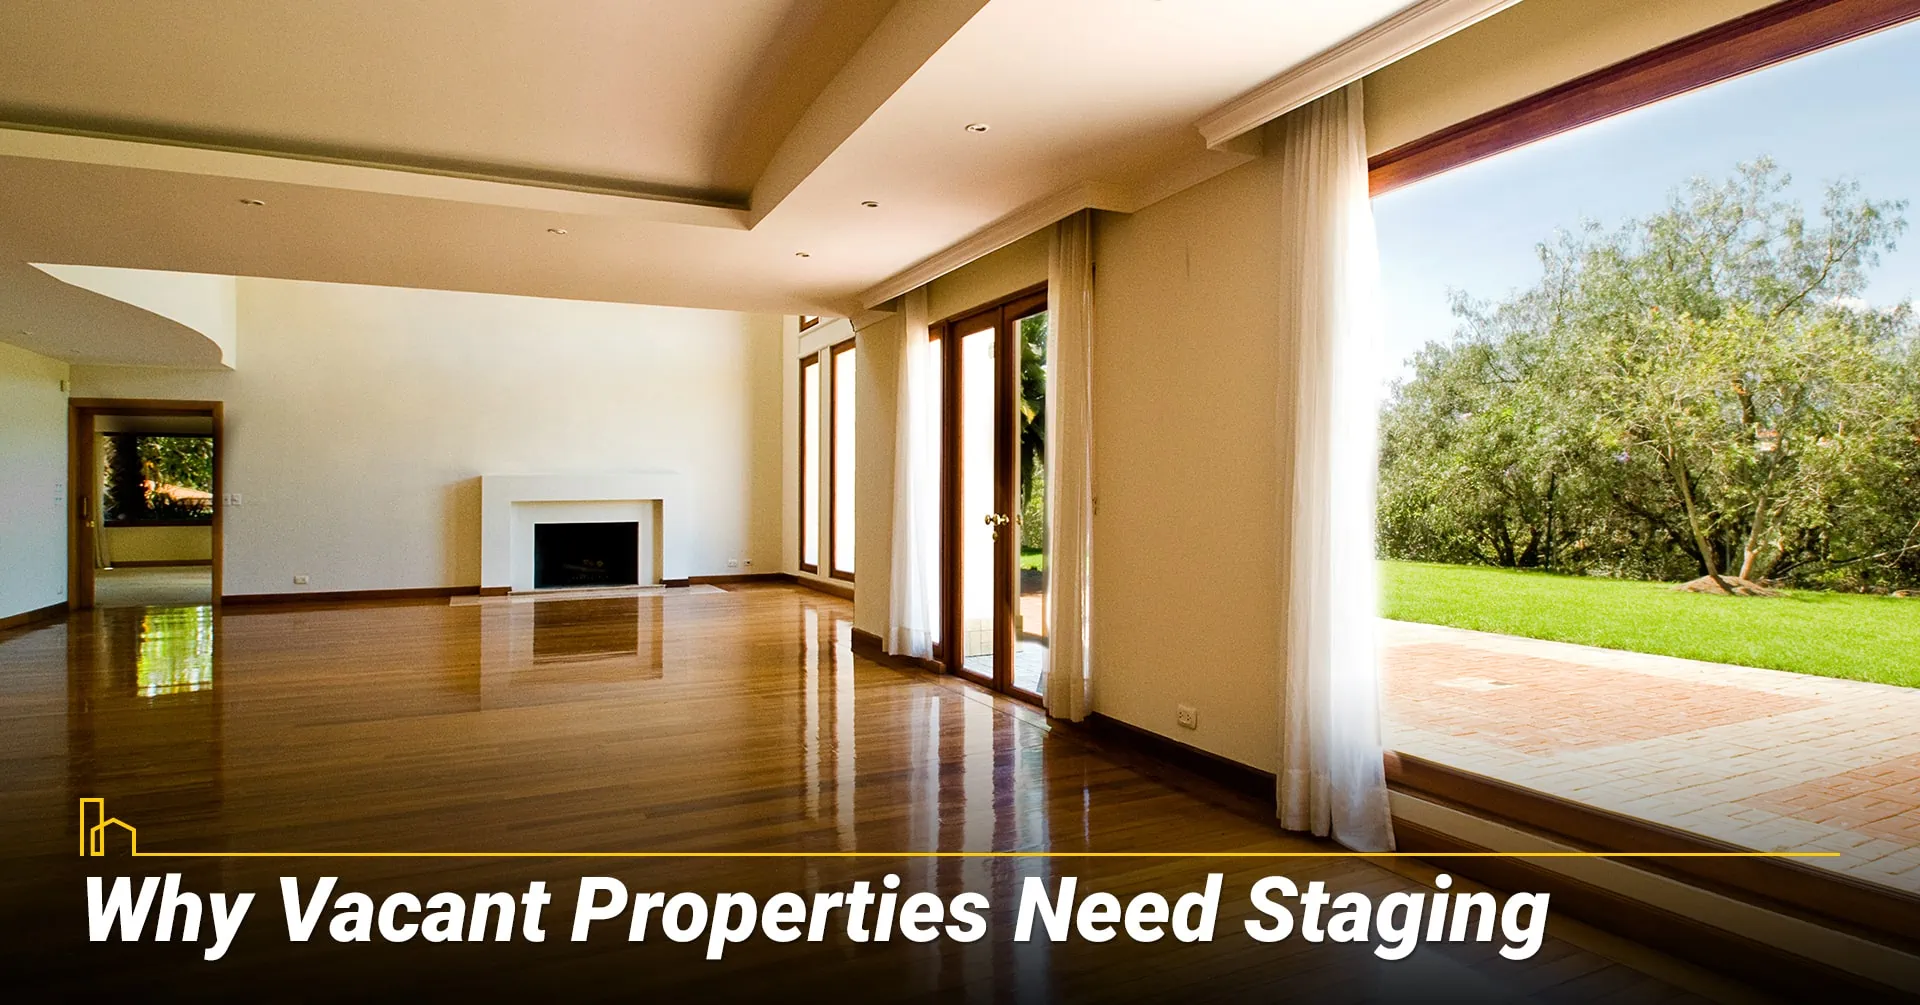 Why Vacant Properties Need Staging